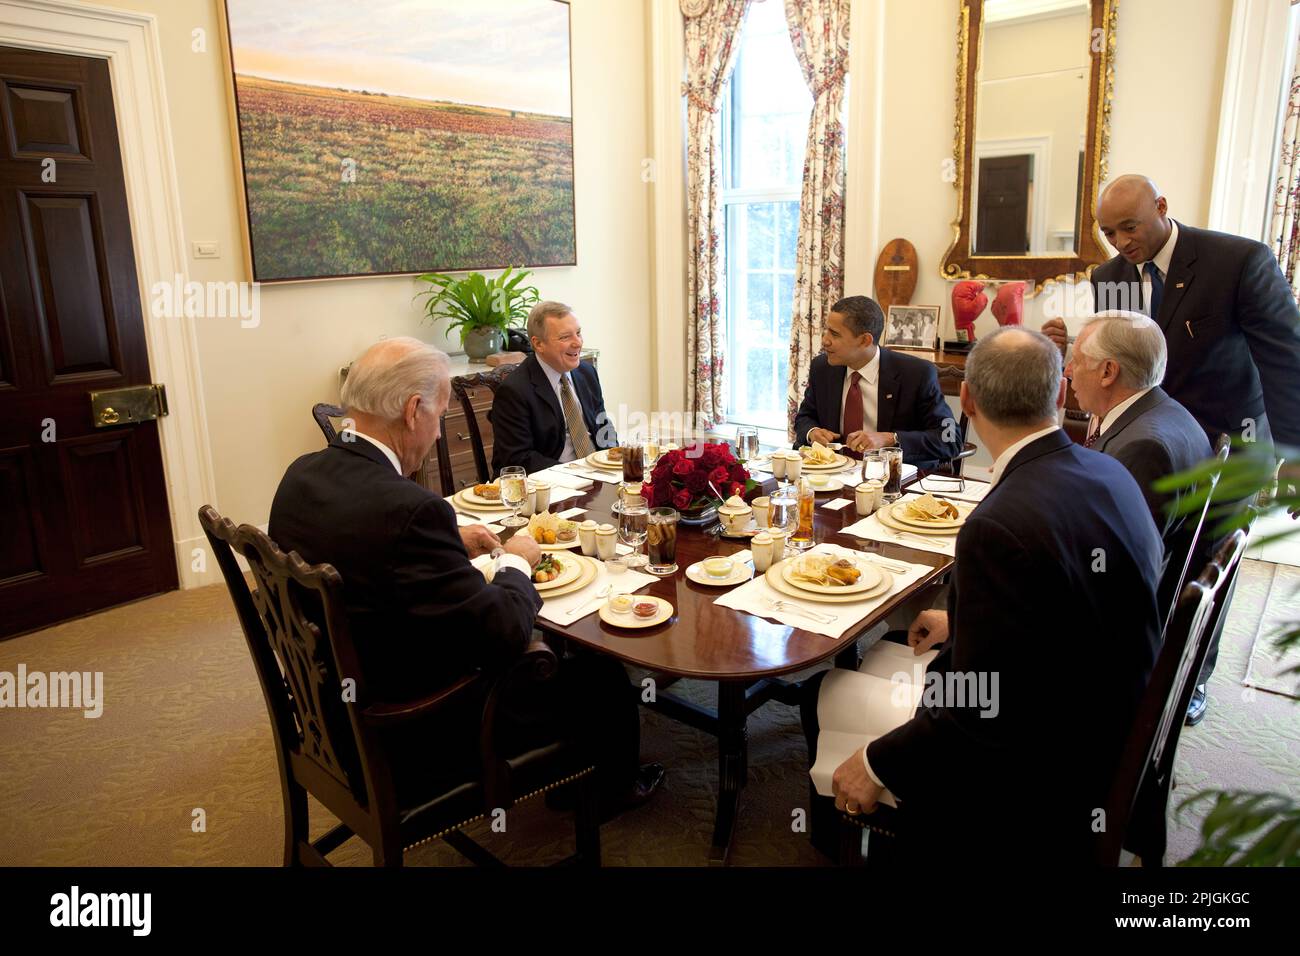 President Barack Obama and Congressional Members, Senator Richard Durbin and Rep. Steny Hoyer eat lunch with Vice President Joe Biden and Assistant to the President for Legislative Affairs Phil Schiliro in the Oval Office Private Dining Room 3/12/09. .Official White House Photo by Pete Souza Stock Photo